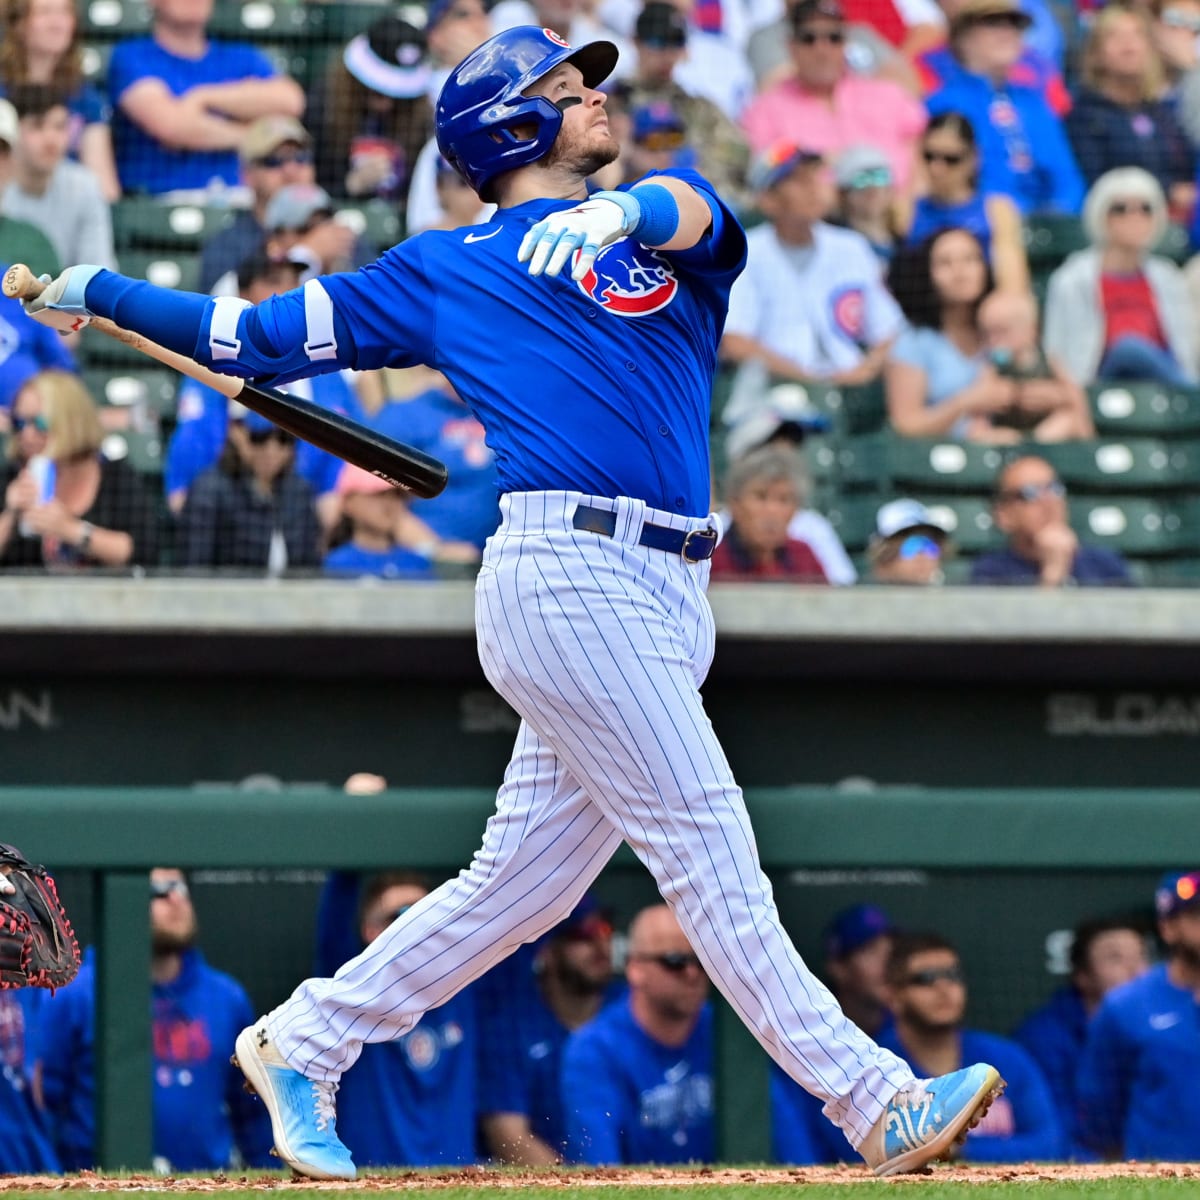 Let's rate the 'free' crap the Cubs are giving away